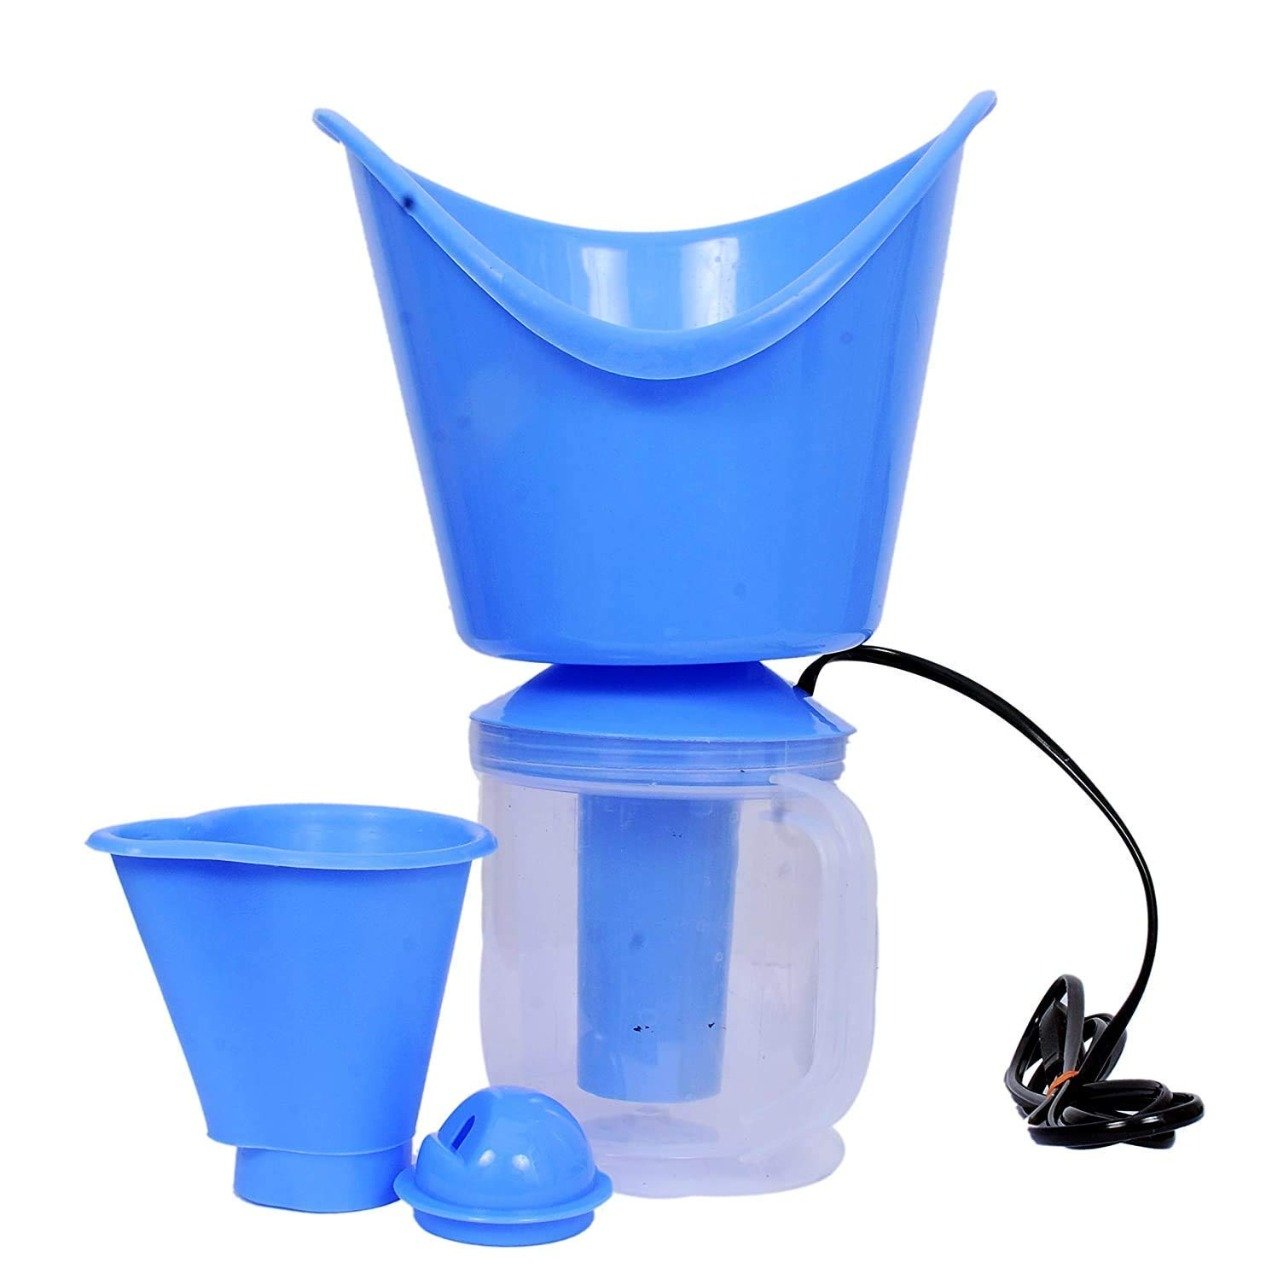 1251 3 in 1 vaporiser steamer for cough and cold kids